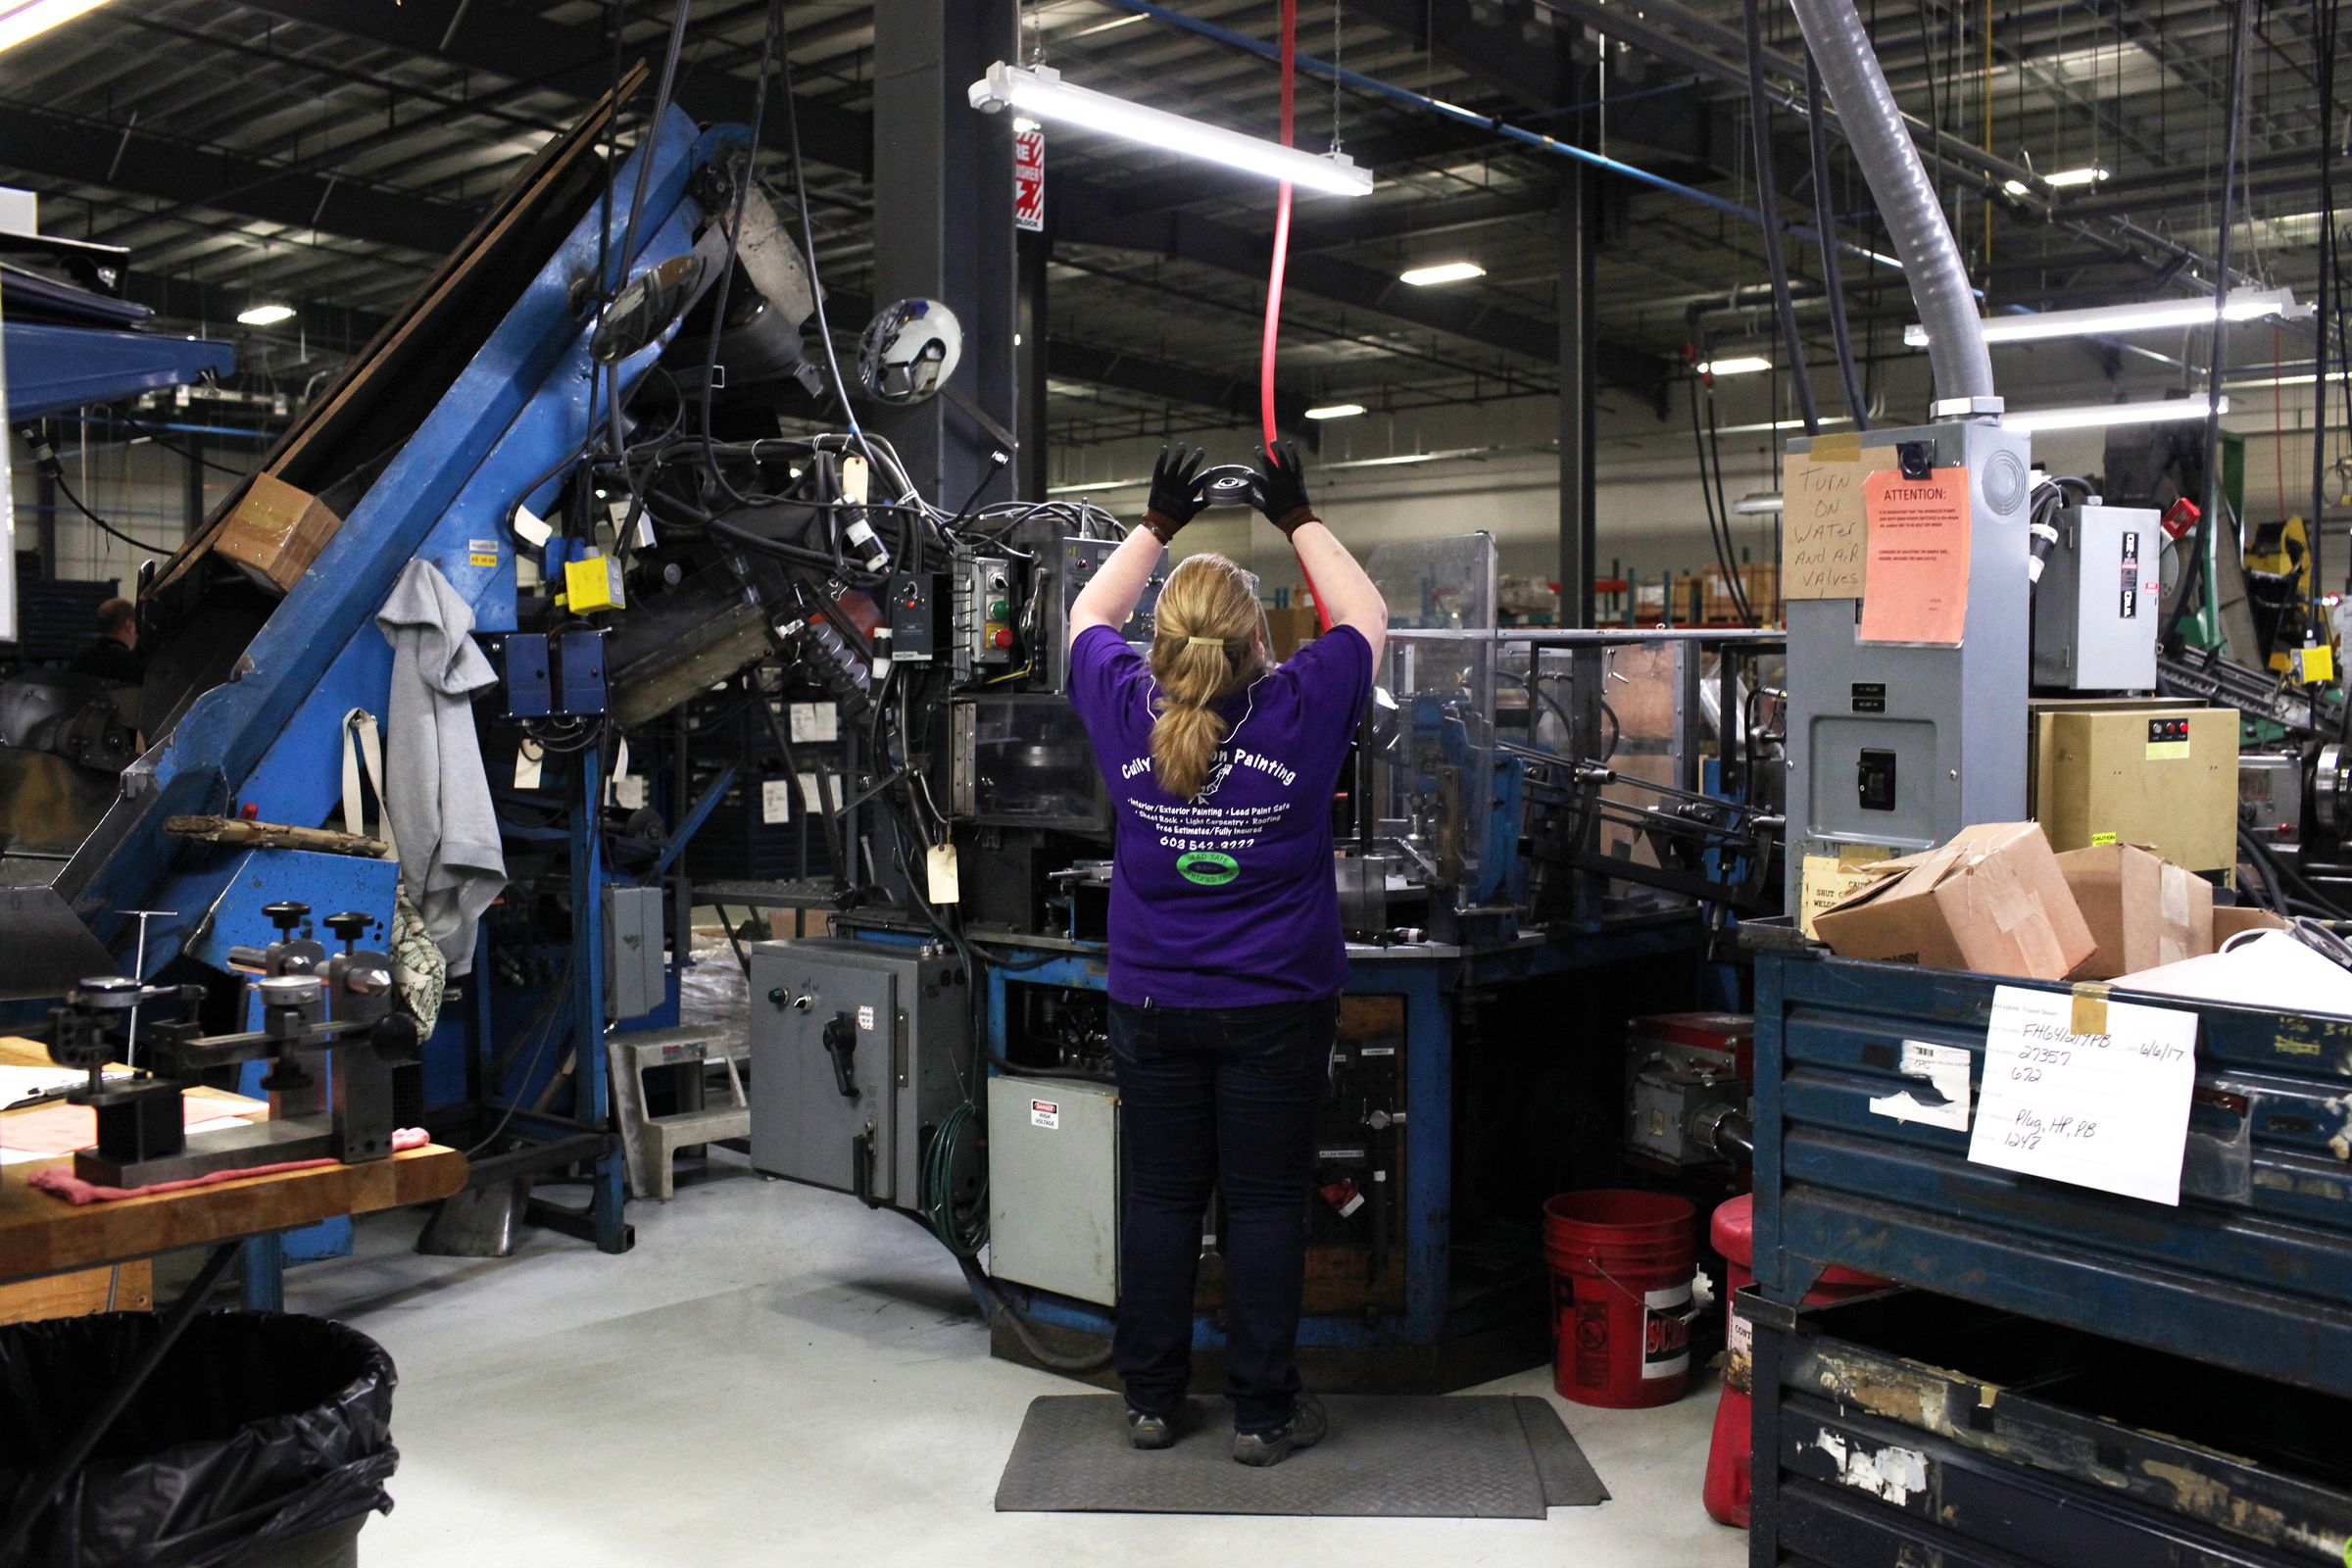 Kim Borcuk, of Claremont, N.H., inspects a pulley part at New Hampshire Industries, also known as NHI, on Tuesday, June 6, 2017, in Claremont. NHI, a pulley manufacturer, recently consolidated its operations from Lebanon, N.H. and Wisconsin to a 137,000-square-foot building in Claremont. (Valley News - Jovelle Tamayo) Copyright Valley News. May not be reprinted or used online without permission. Send requests to permission@vnews.com.